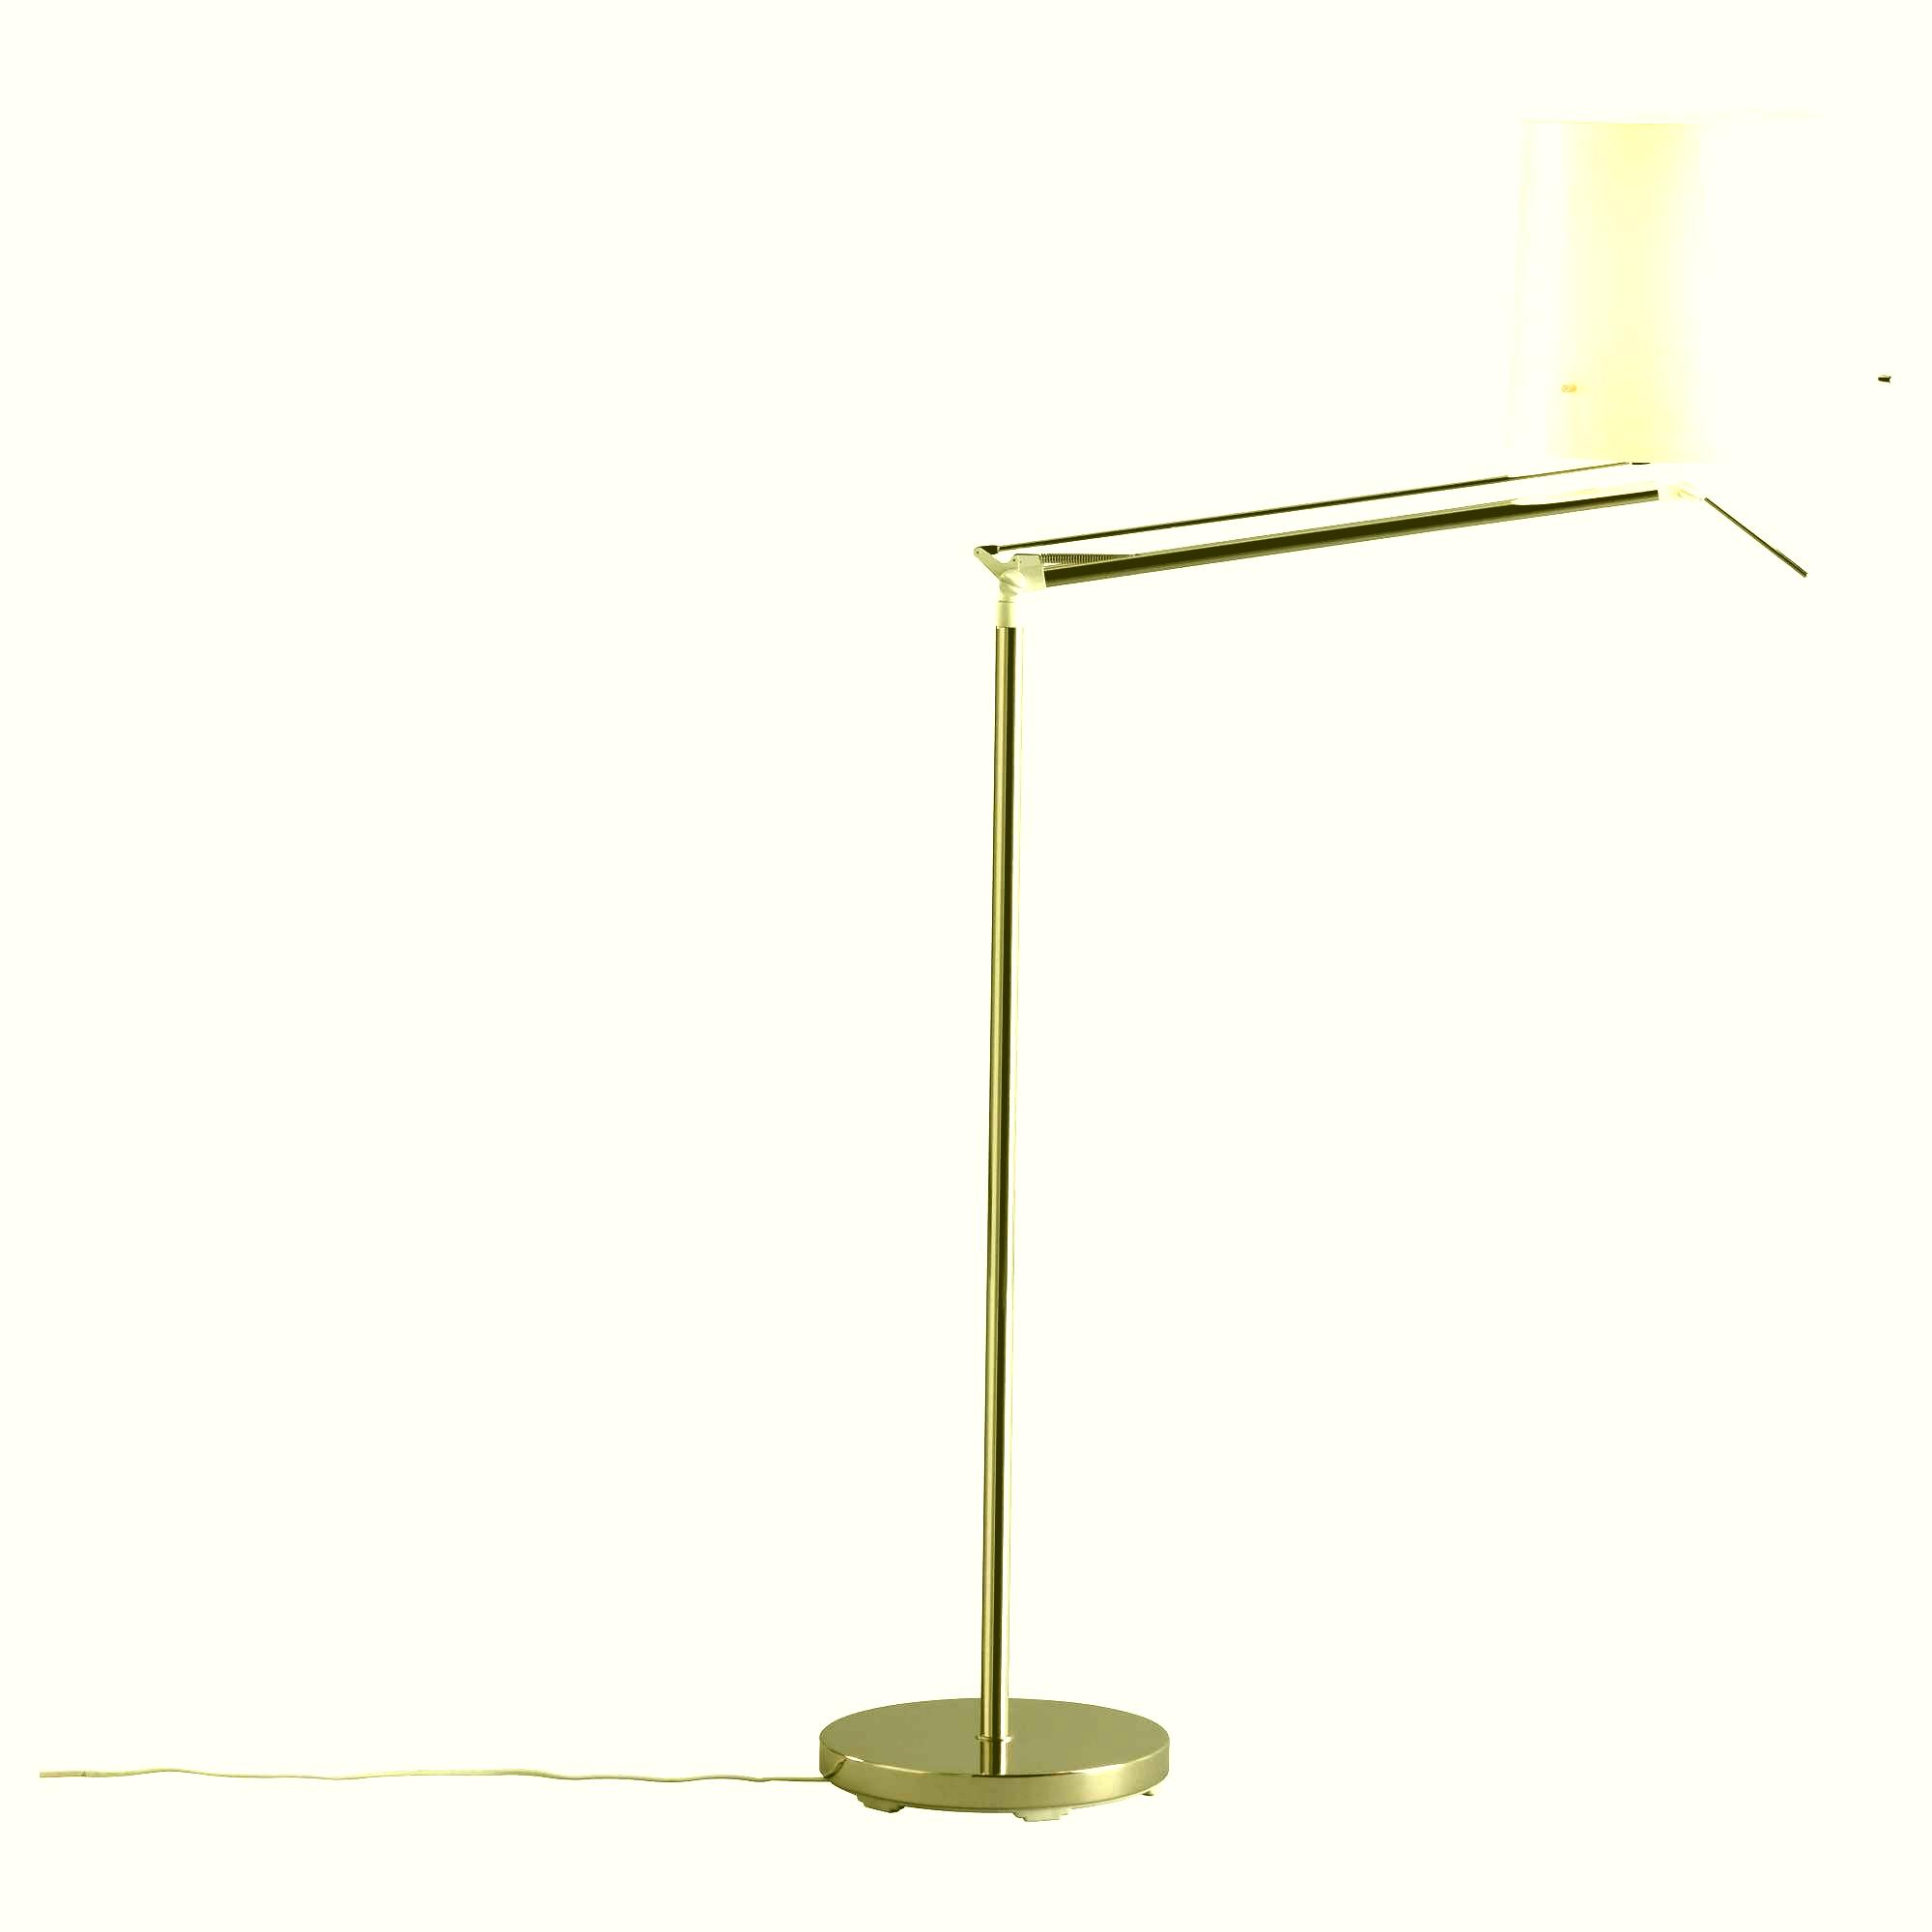 Contemporary Floor Standing Lamp With Dimmer Switch Bright intended for sizing 2000 X 2000